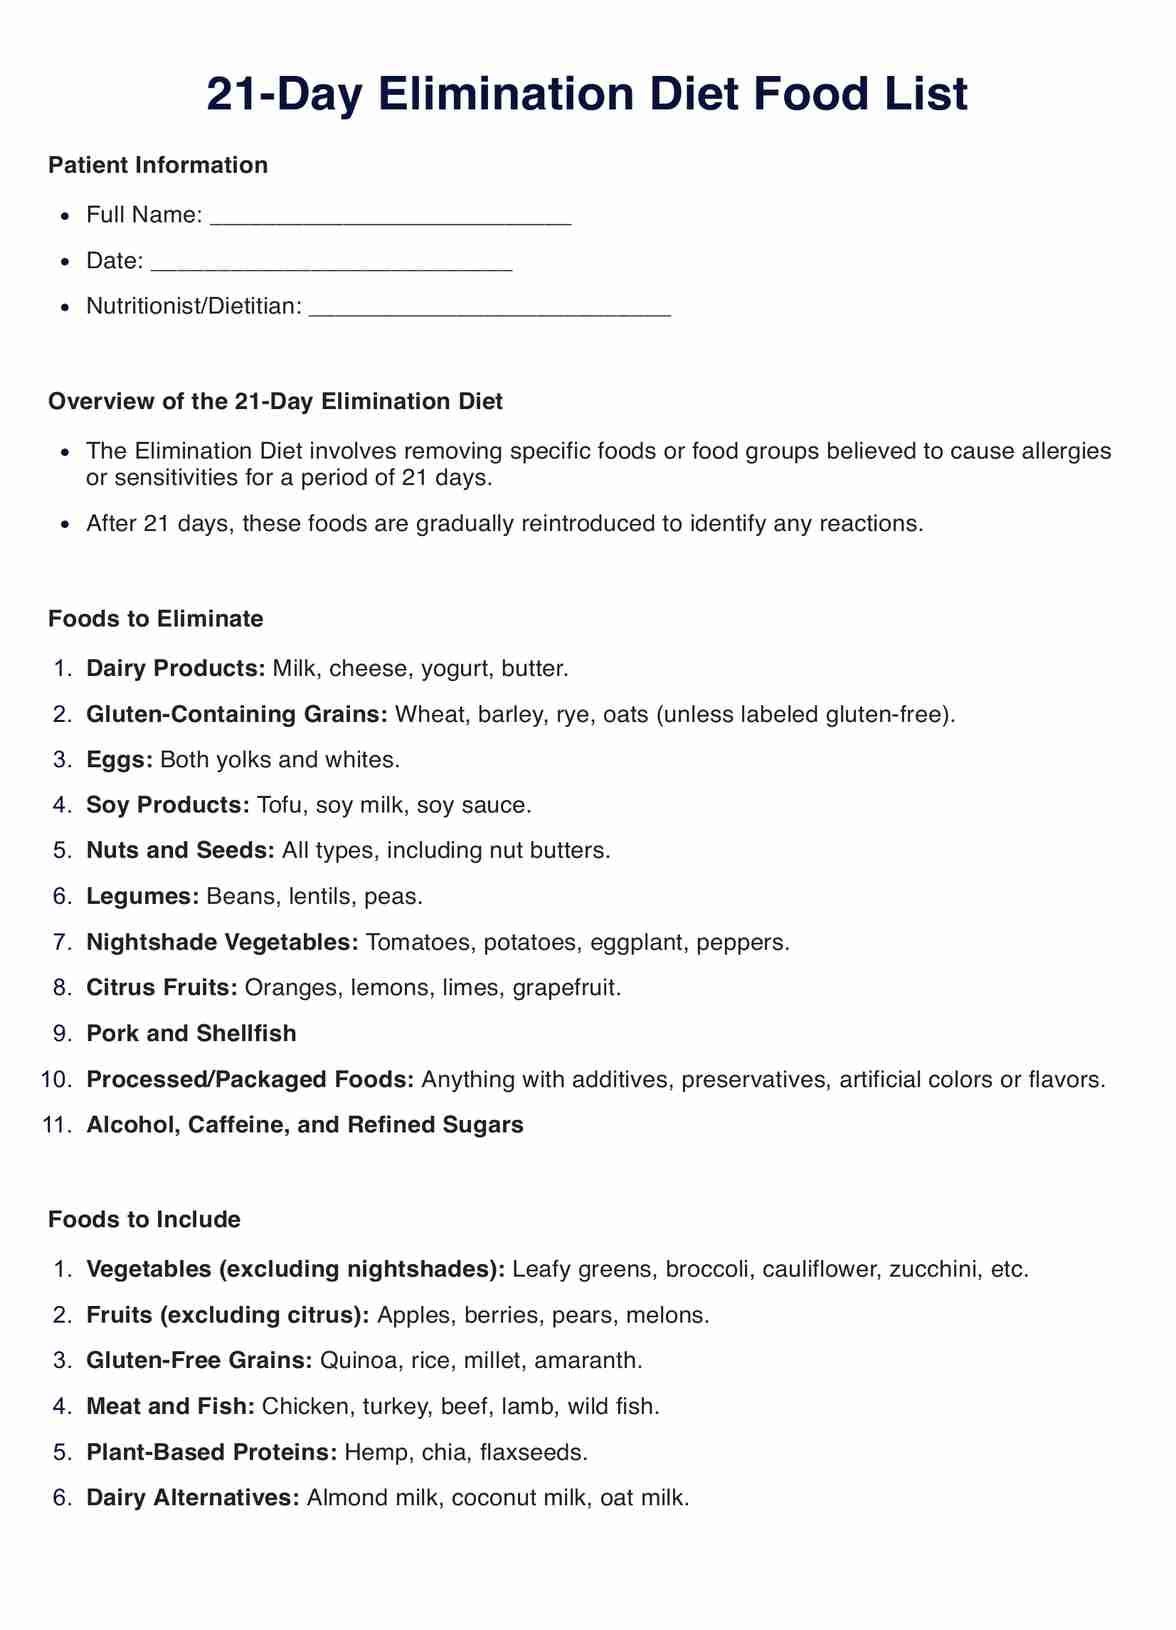 21 Day Elimination Diet Food List PDF Example